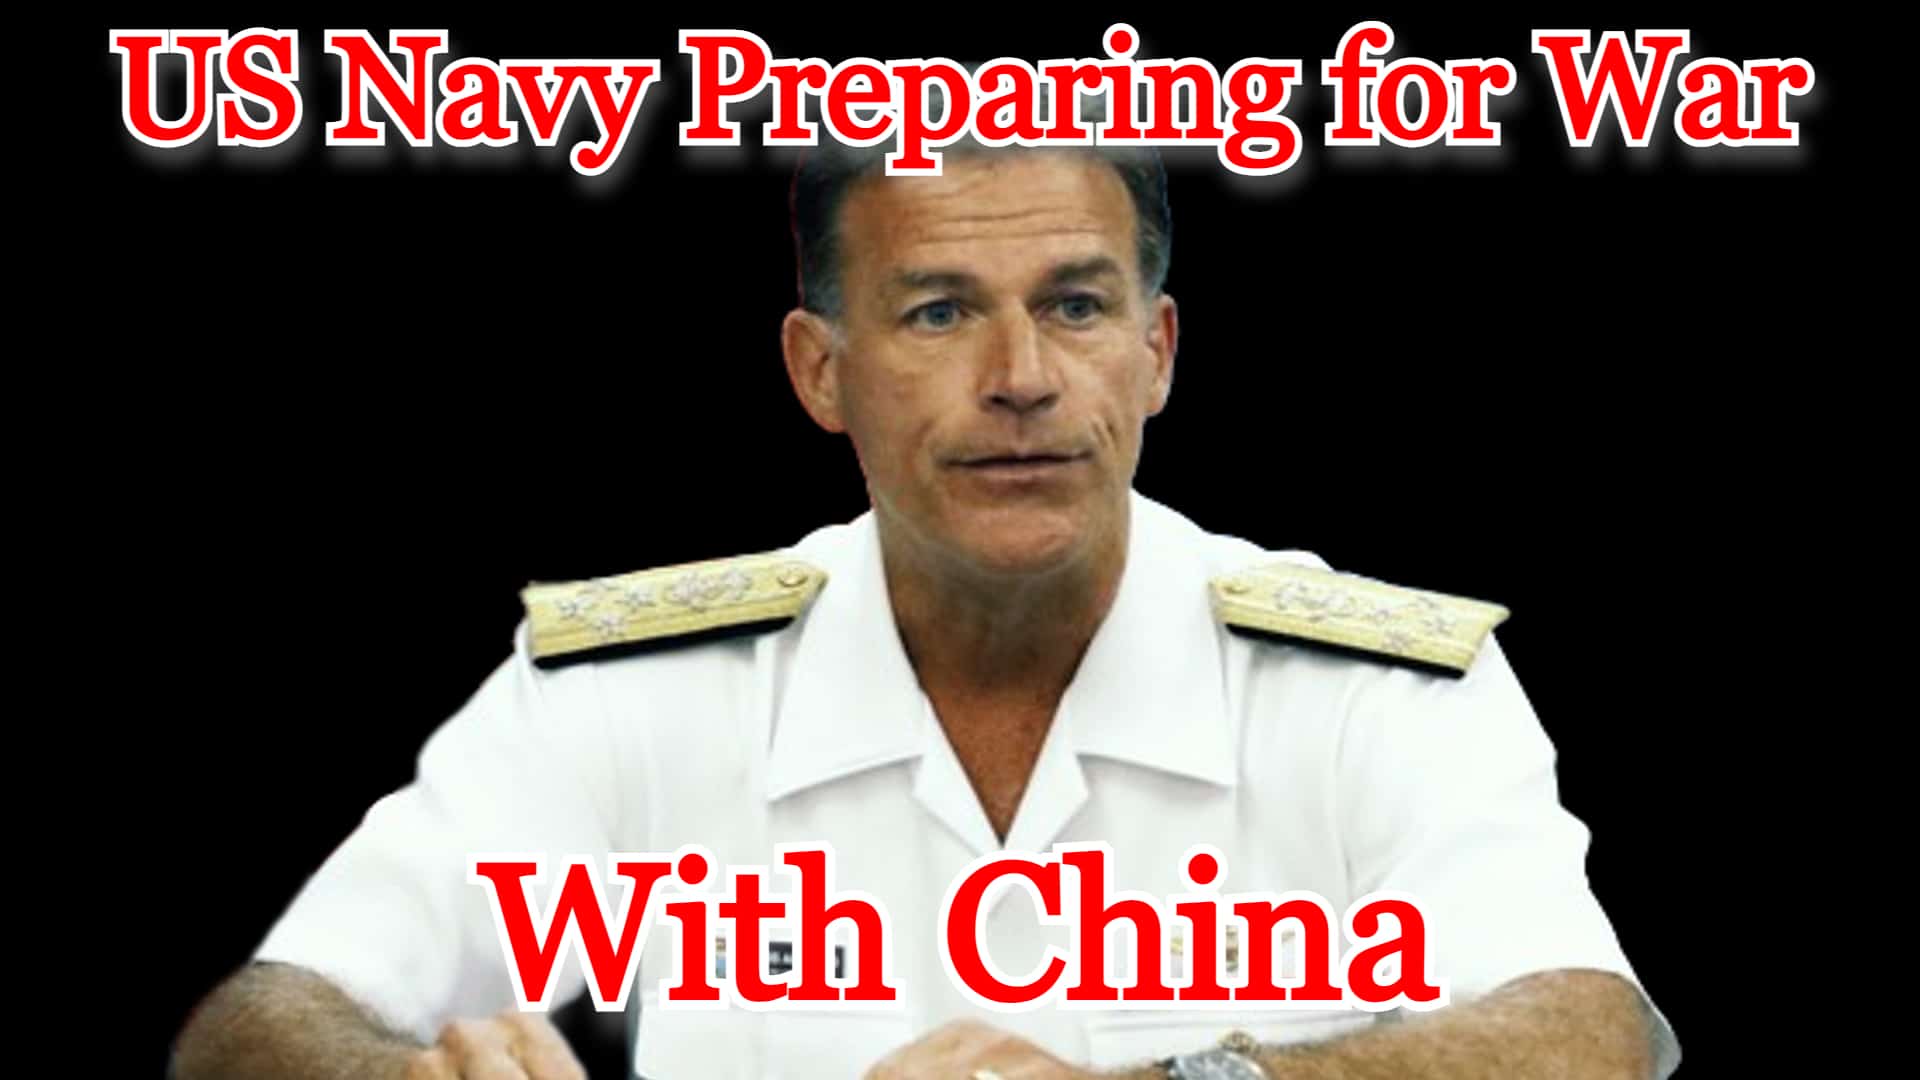 COI #432: US Navy Preparing for War with China